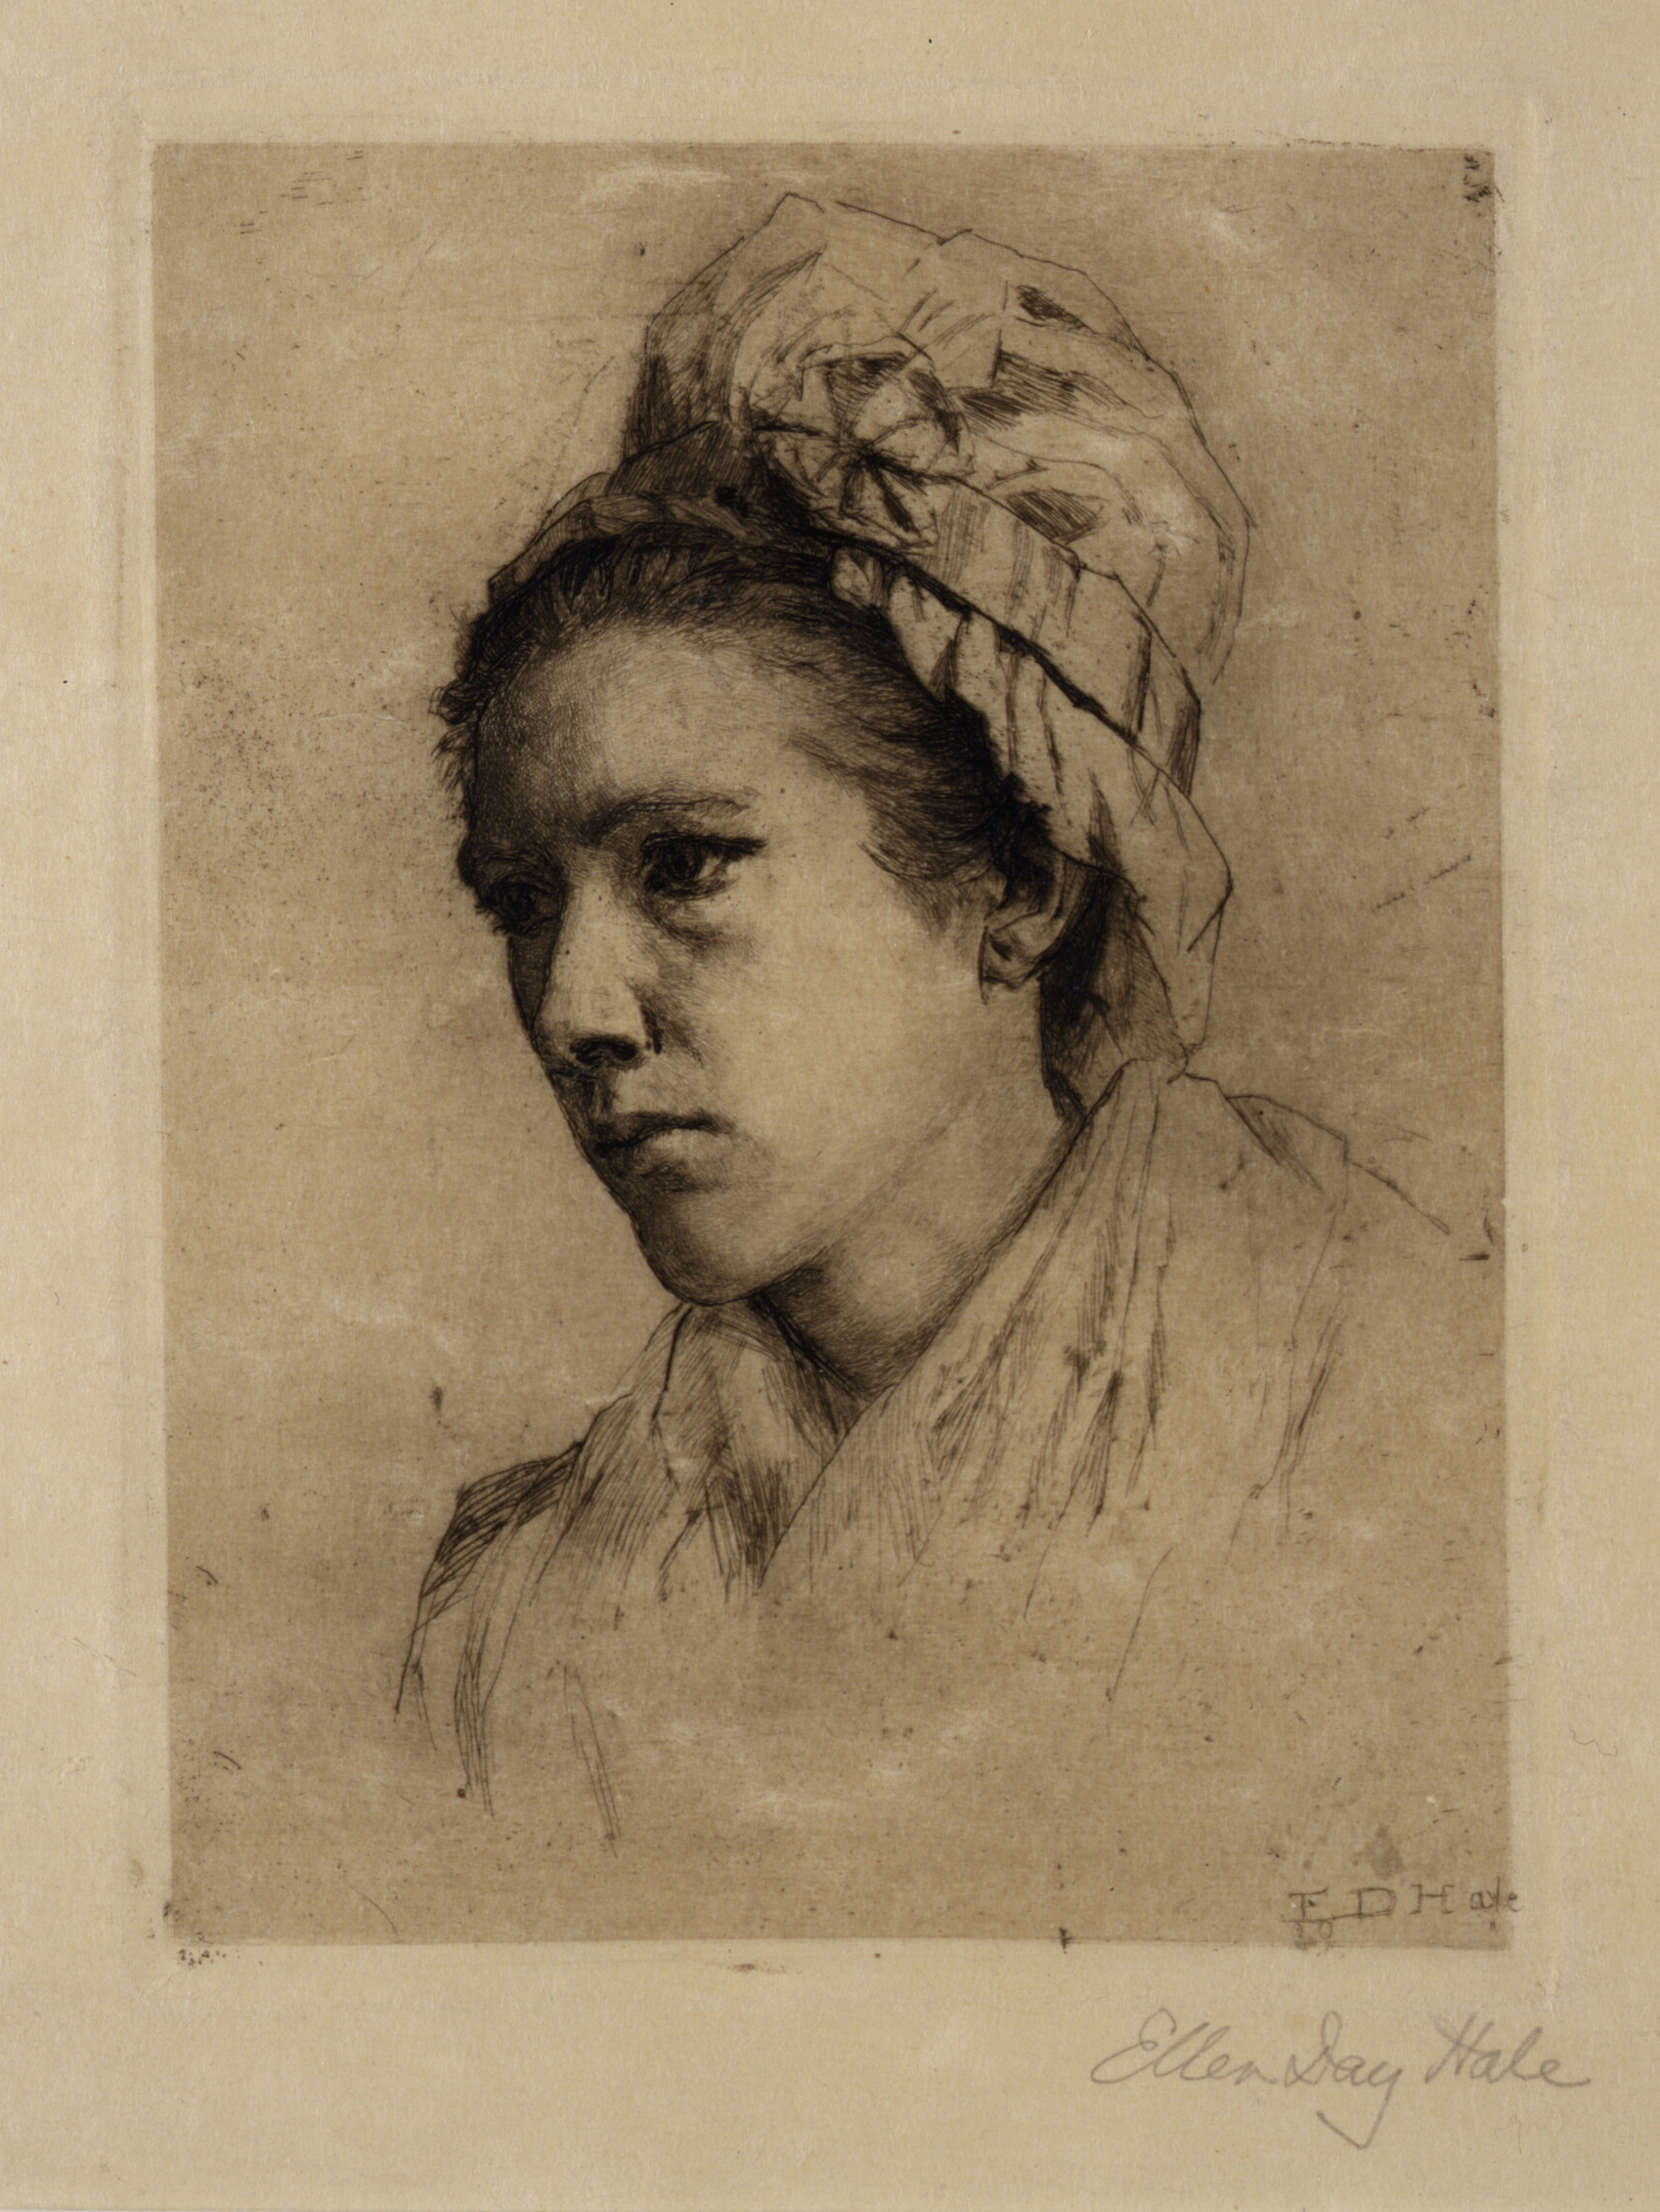 Print portrait in black ink against an ivory background of a young woman with light skintone in three quarter view wearing a tall bonnet-like cap and a hint of shawl modestly draped around her neck.